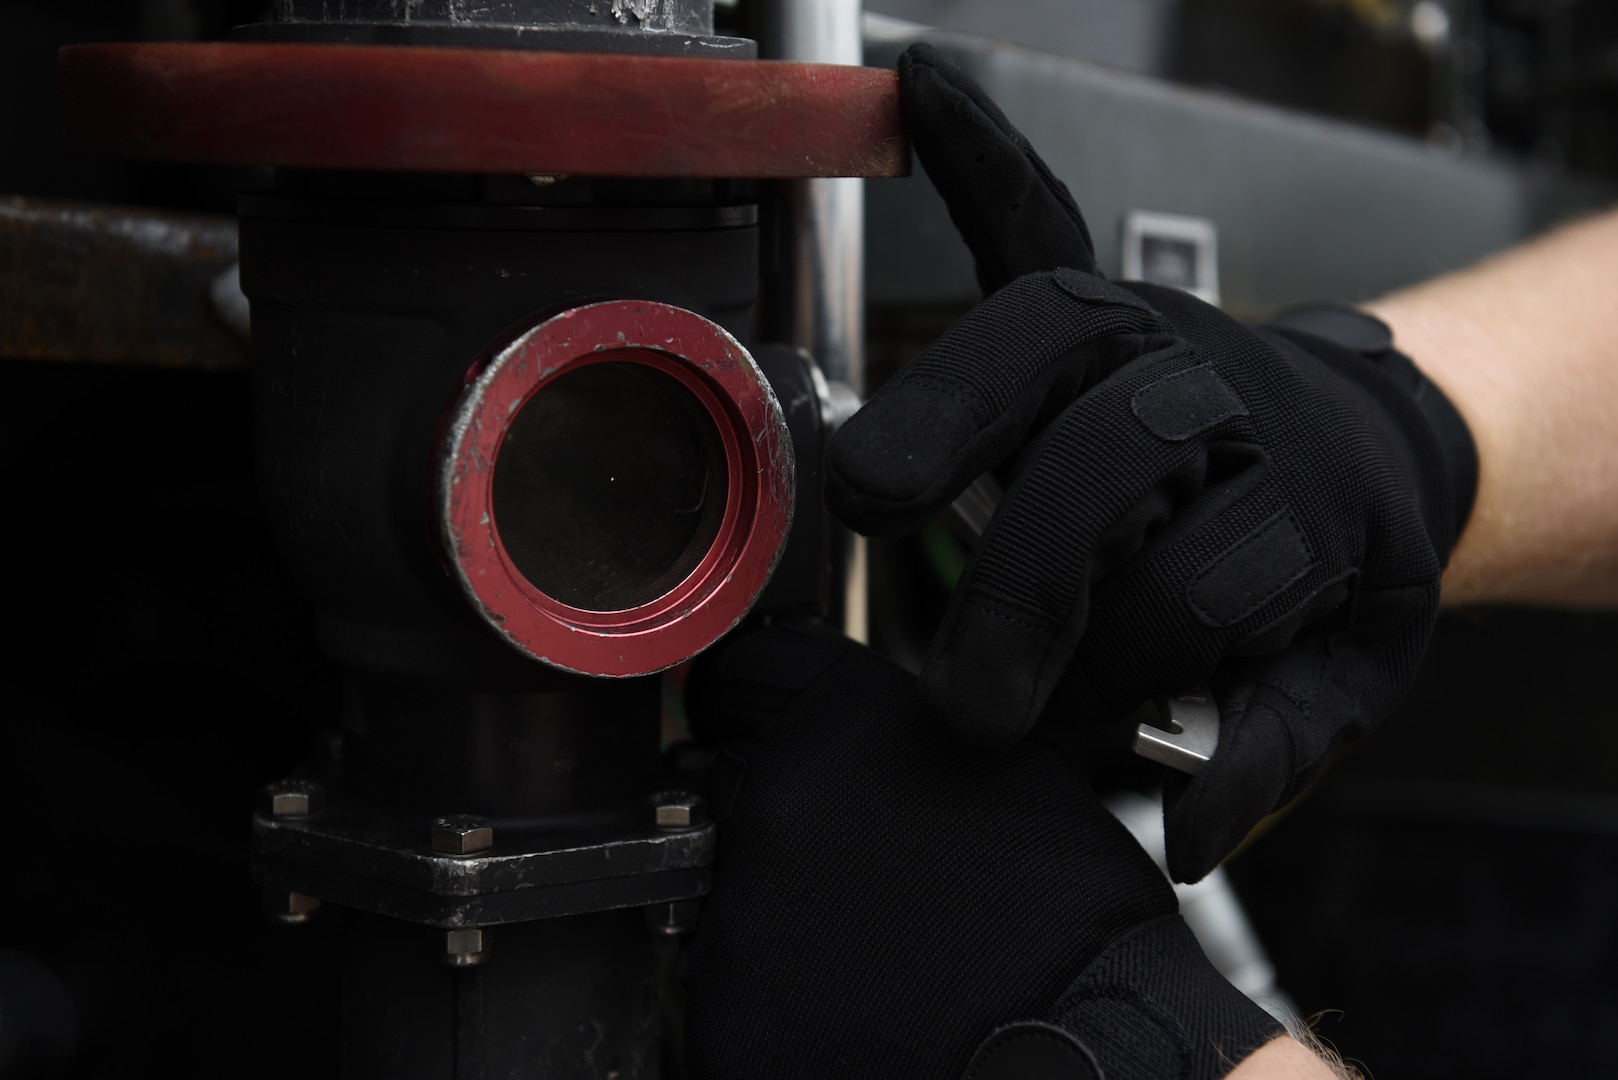 U.S. Air Force Senior Airman Reinhardt Andersen, 20th Logistics Readiness Squadron fuels distribution operator, checks a hose filter at Shaw Air Force Base, S.C., Feb. 22, 2018.